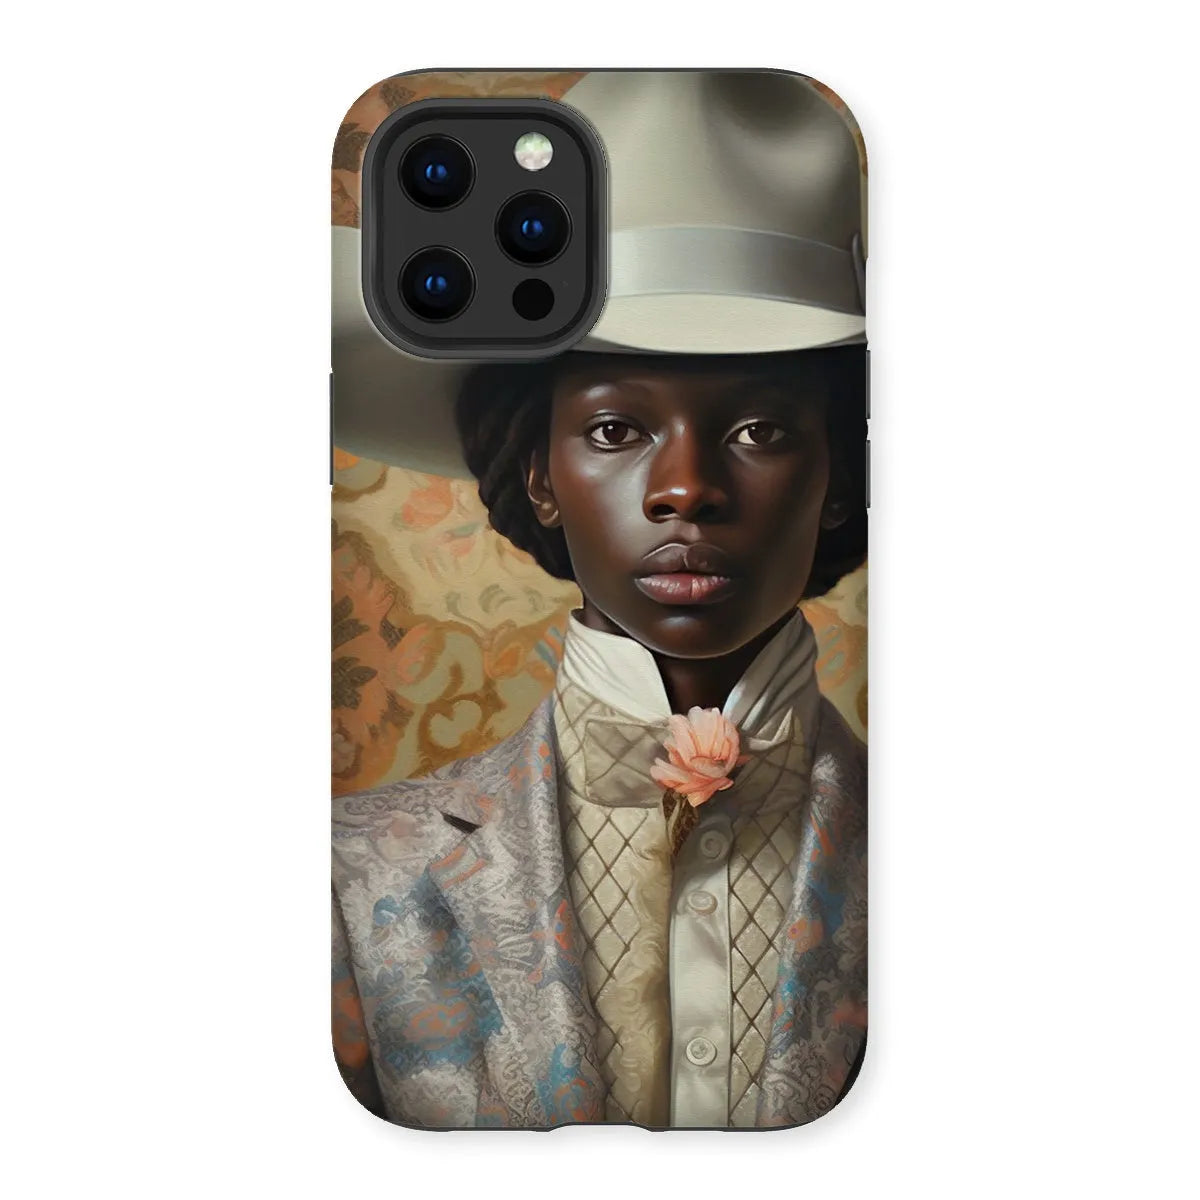 Caesar The Gay Cowboy - Gay Aesthetic Art Phone Case - Iphone 12 Pro Max / Matte - Mobile Phone Cases - Aesthetic Art